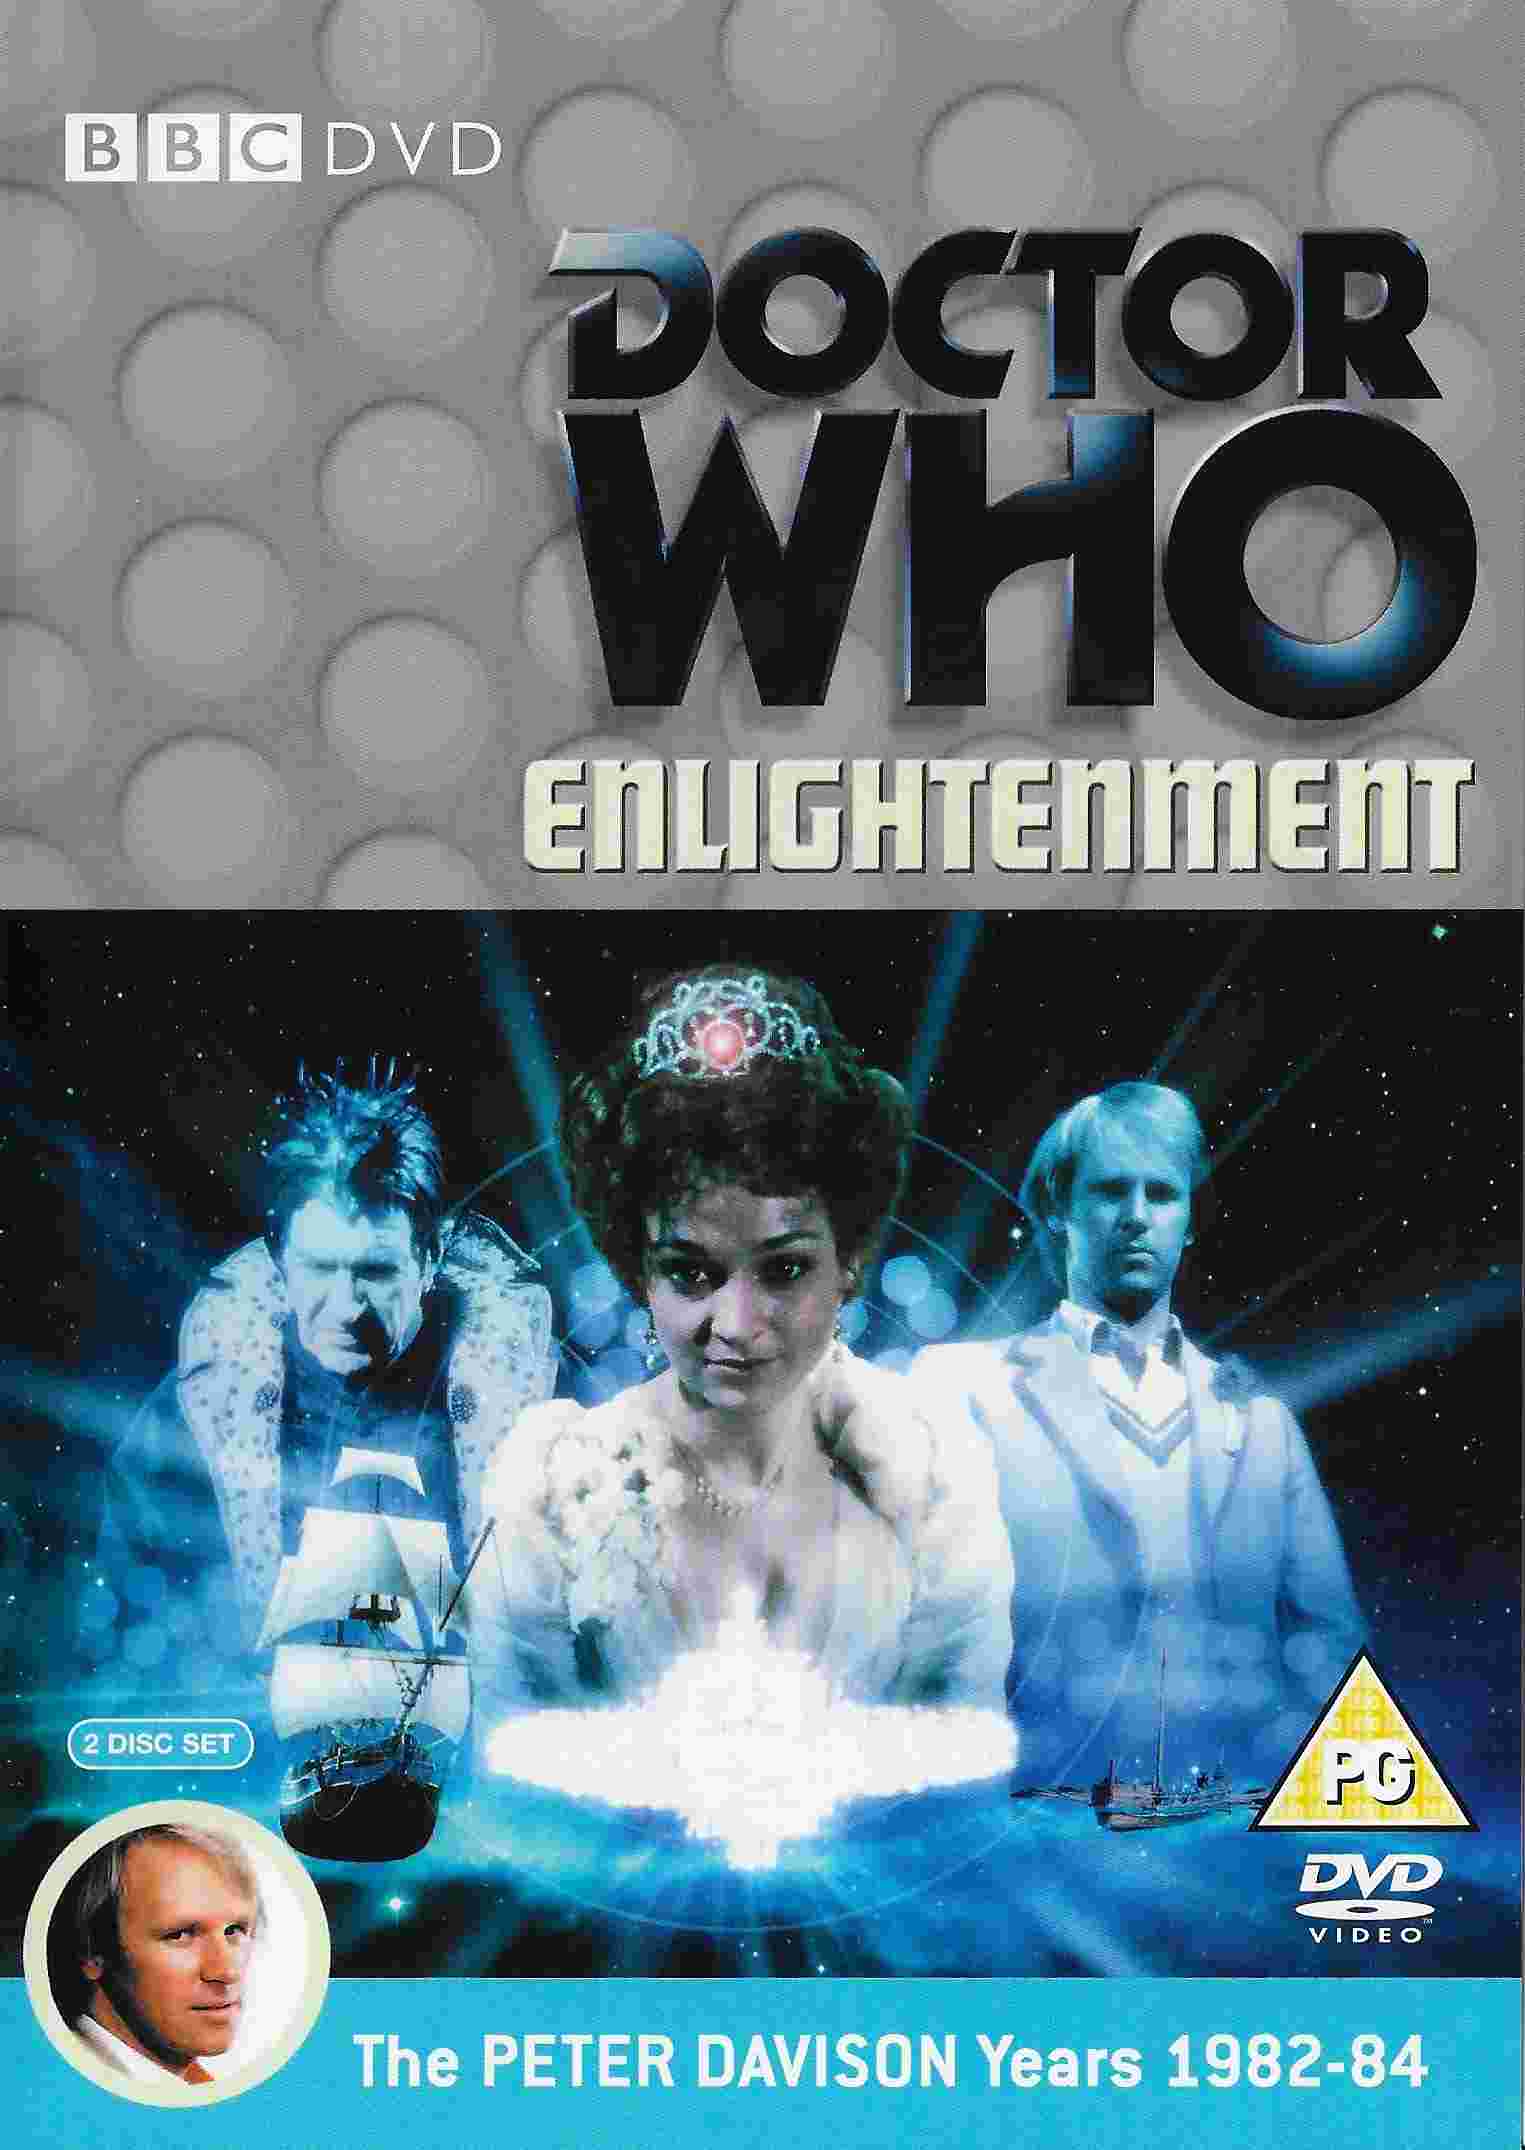 Picture of BBCDVD 2596C Doctor Who - Enlightenment by artist Barbara Clegg from the BBC dvds - Records and Tapes library